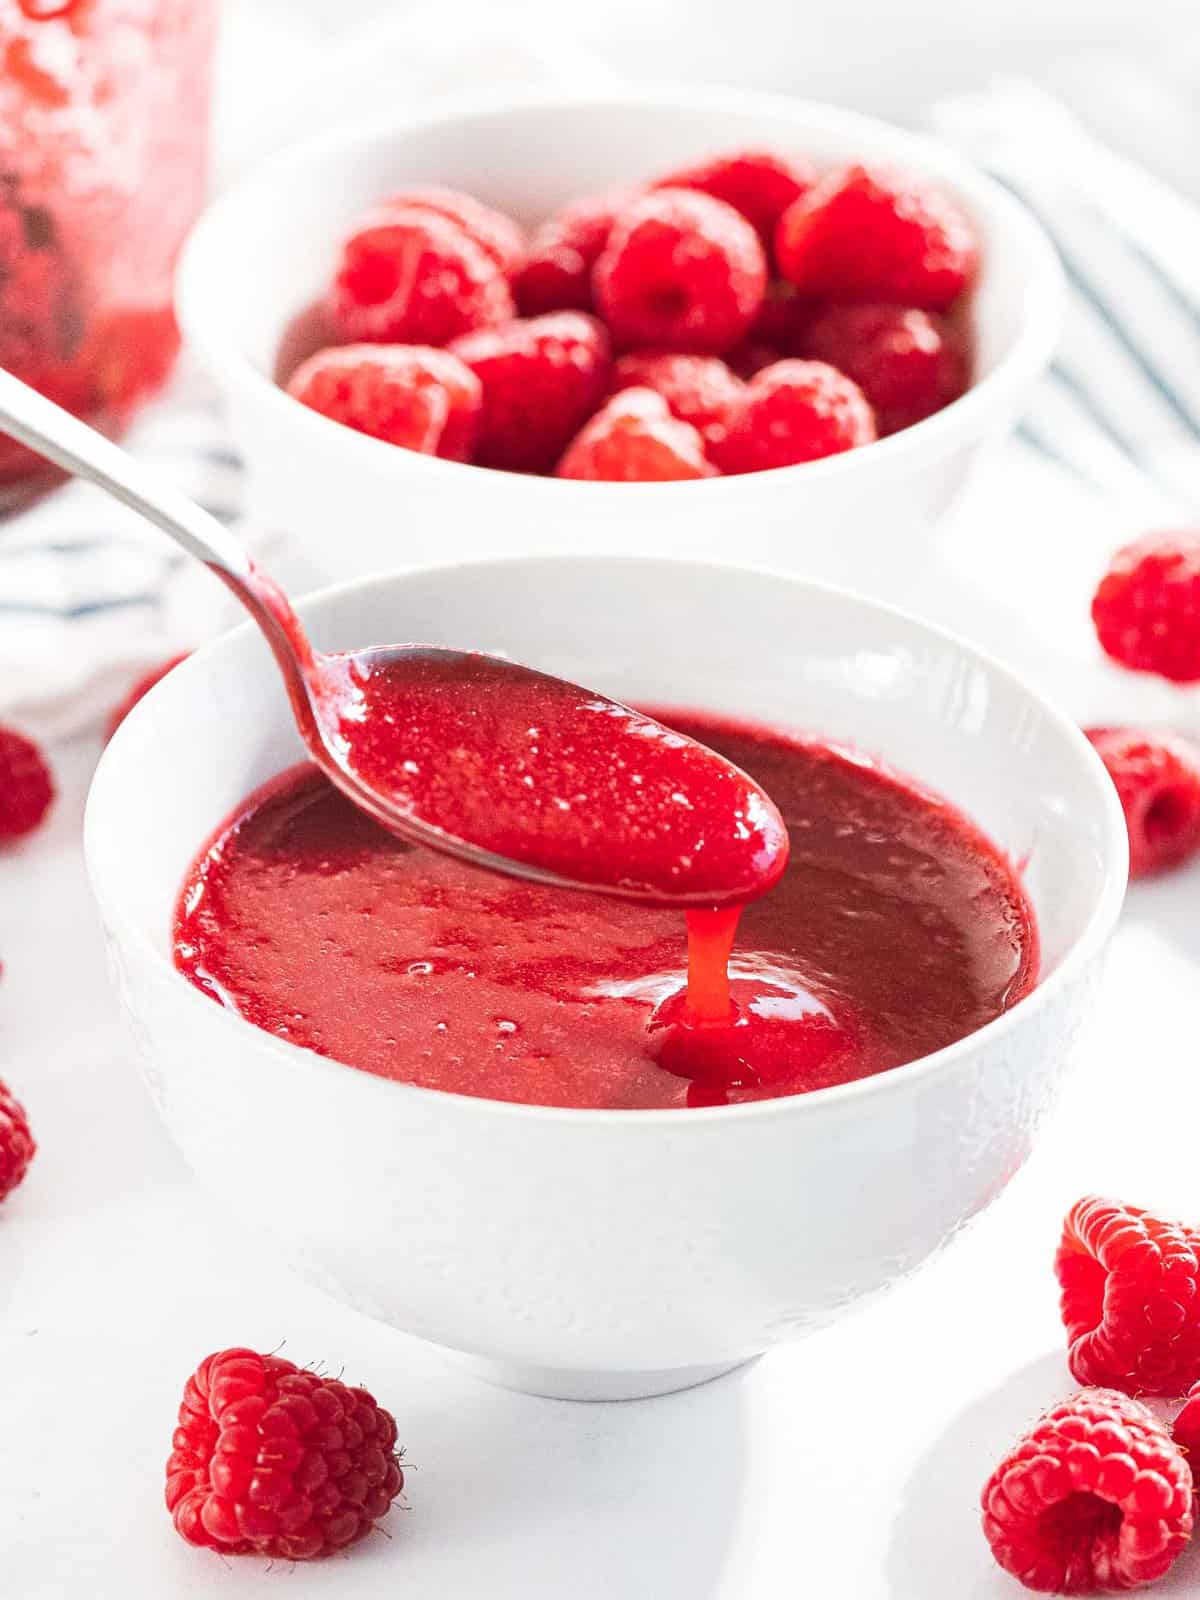 Raspberry sauce or raspberry coulis drizzled off a spoon into a bowl.